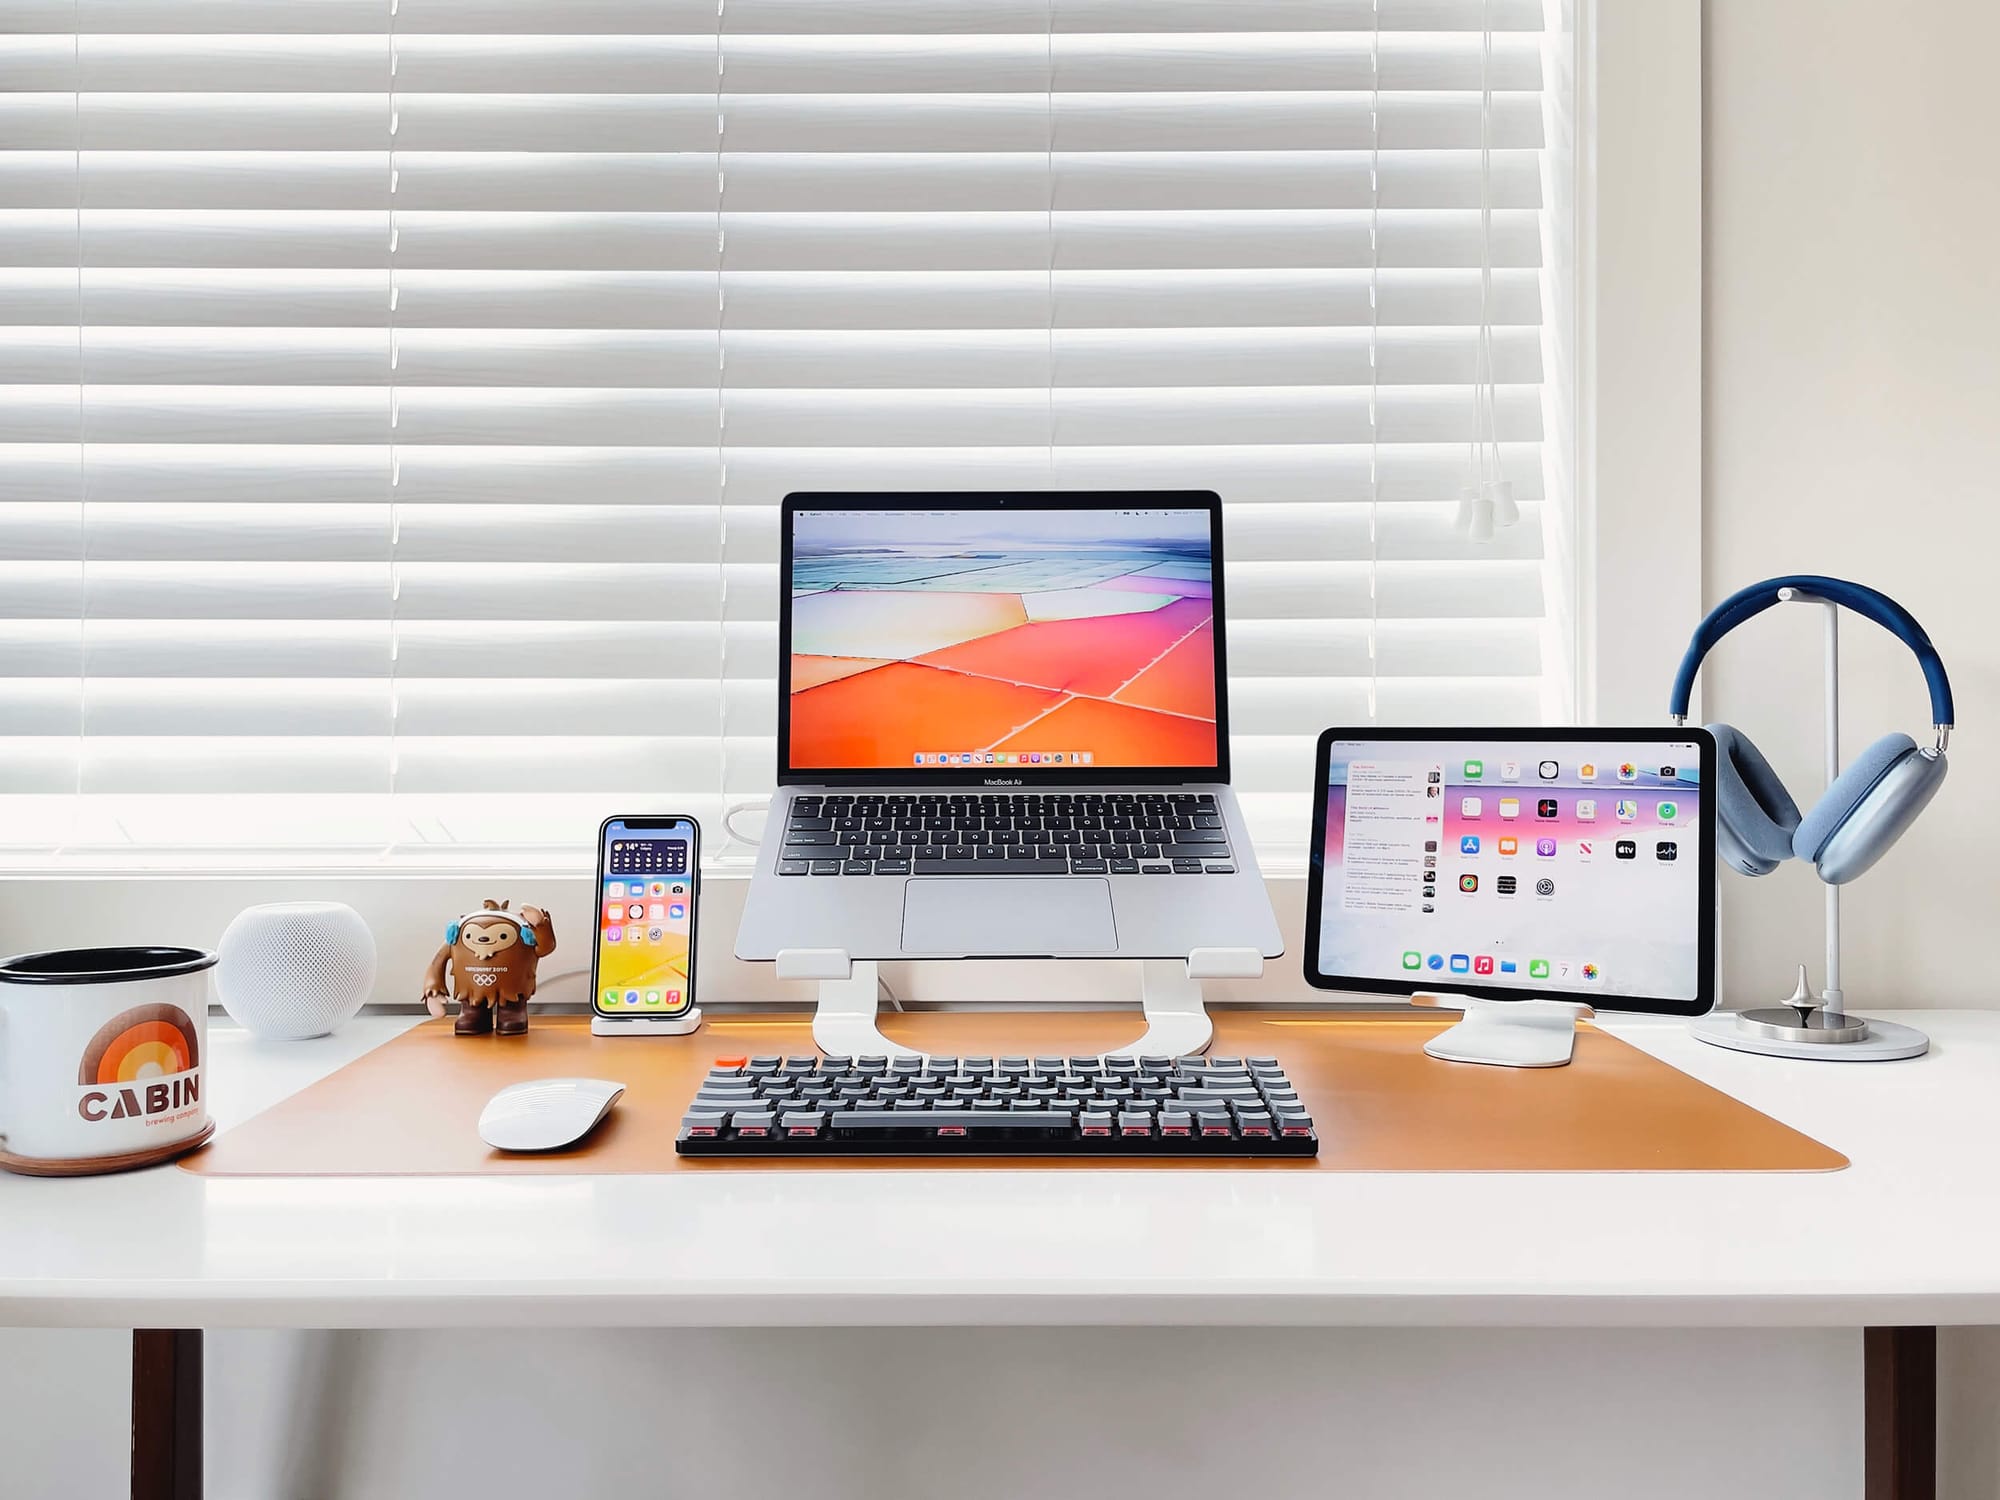 A bright and organised desk setup featuring an Apple MacBook on a stand, iPad with keyboard, iPhone, HomePod, mechanical keyboard, and headphones, all neatly arranged on a white desk against a window with white blinds